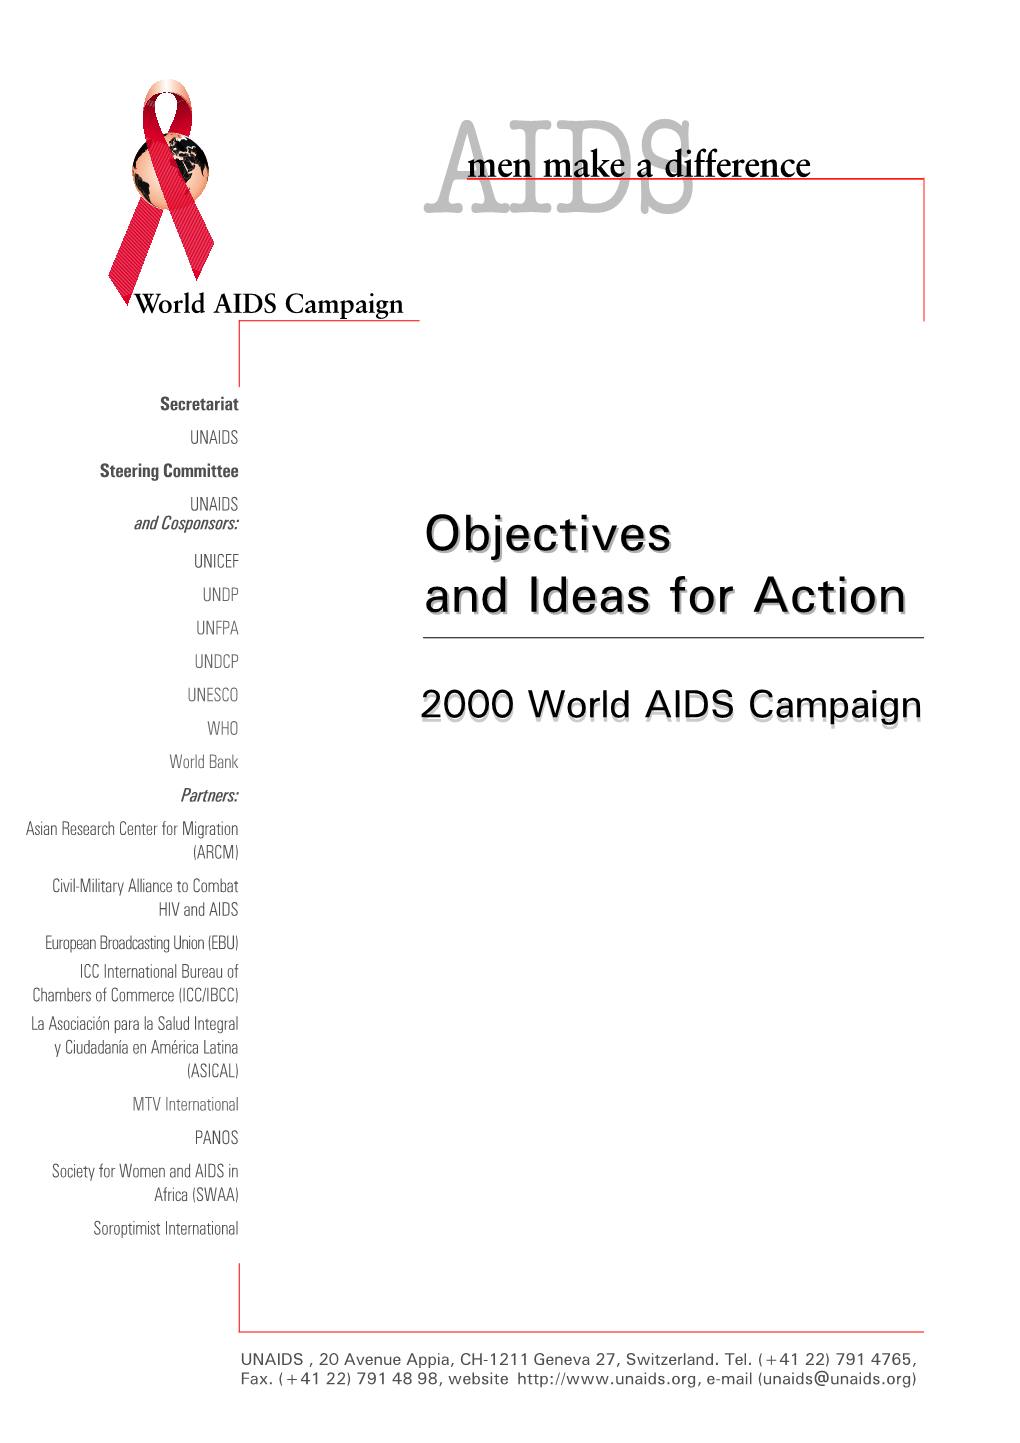 Objectives and Ideas for Action